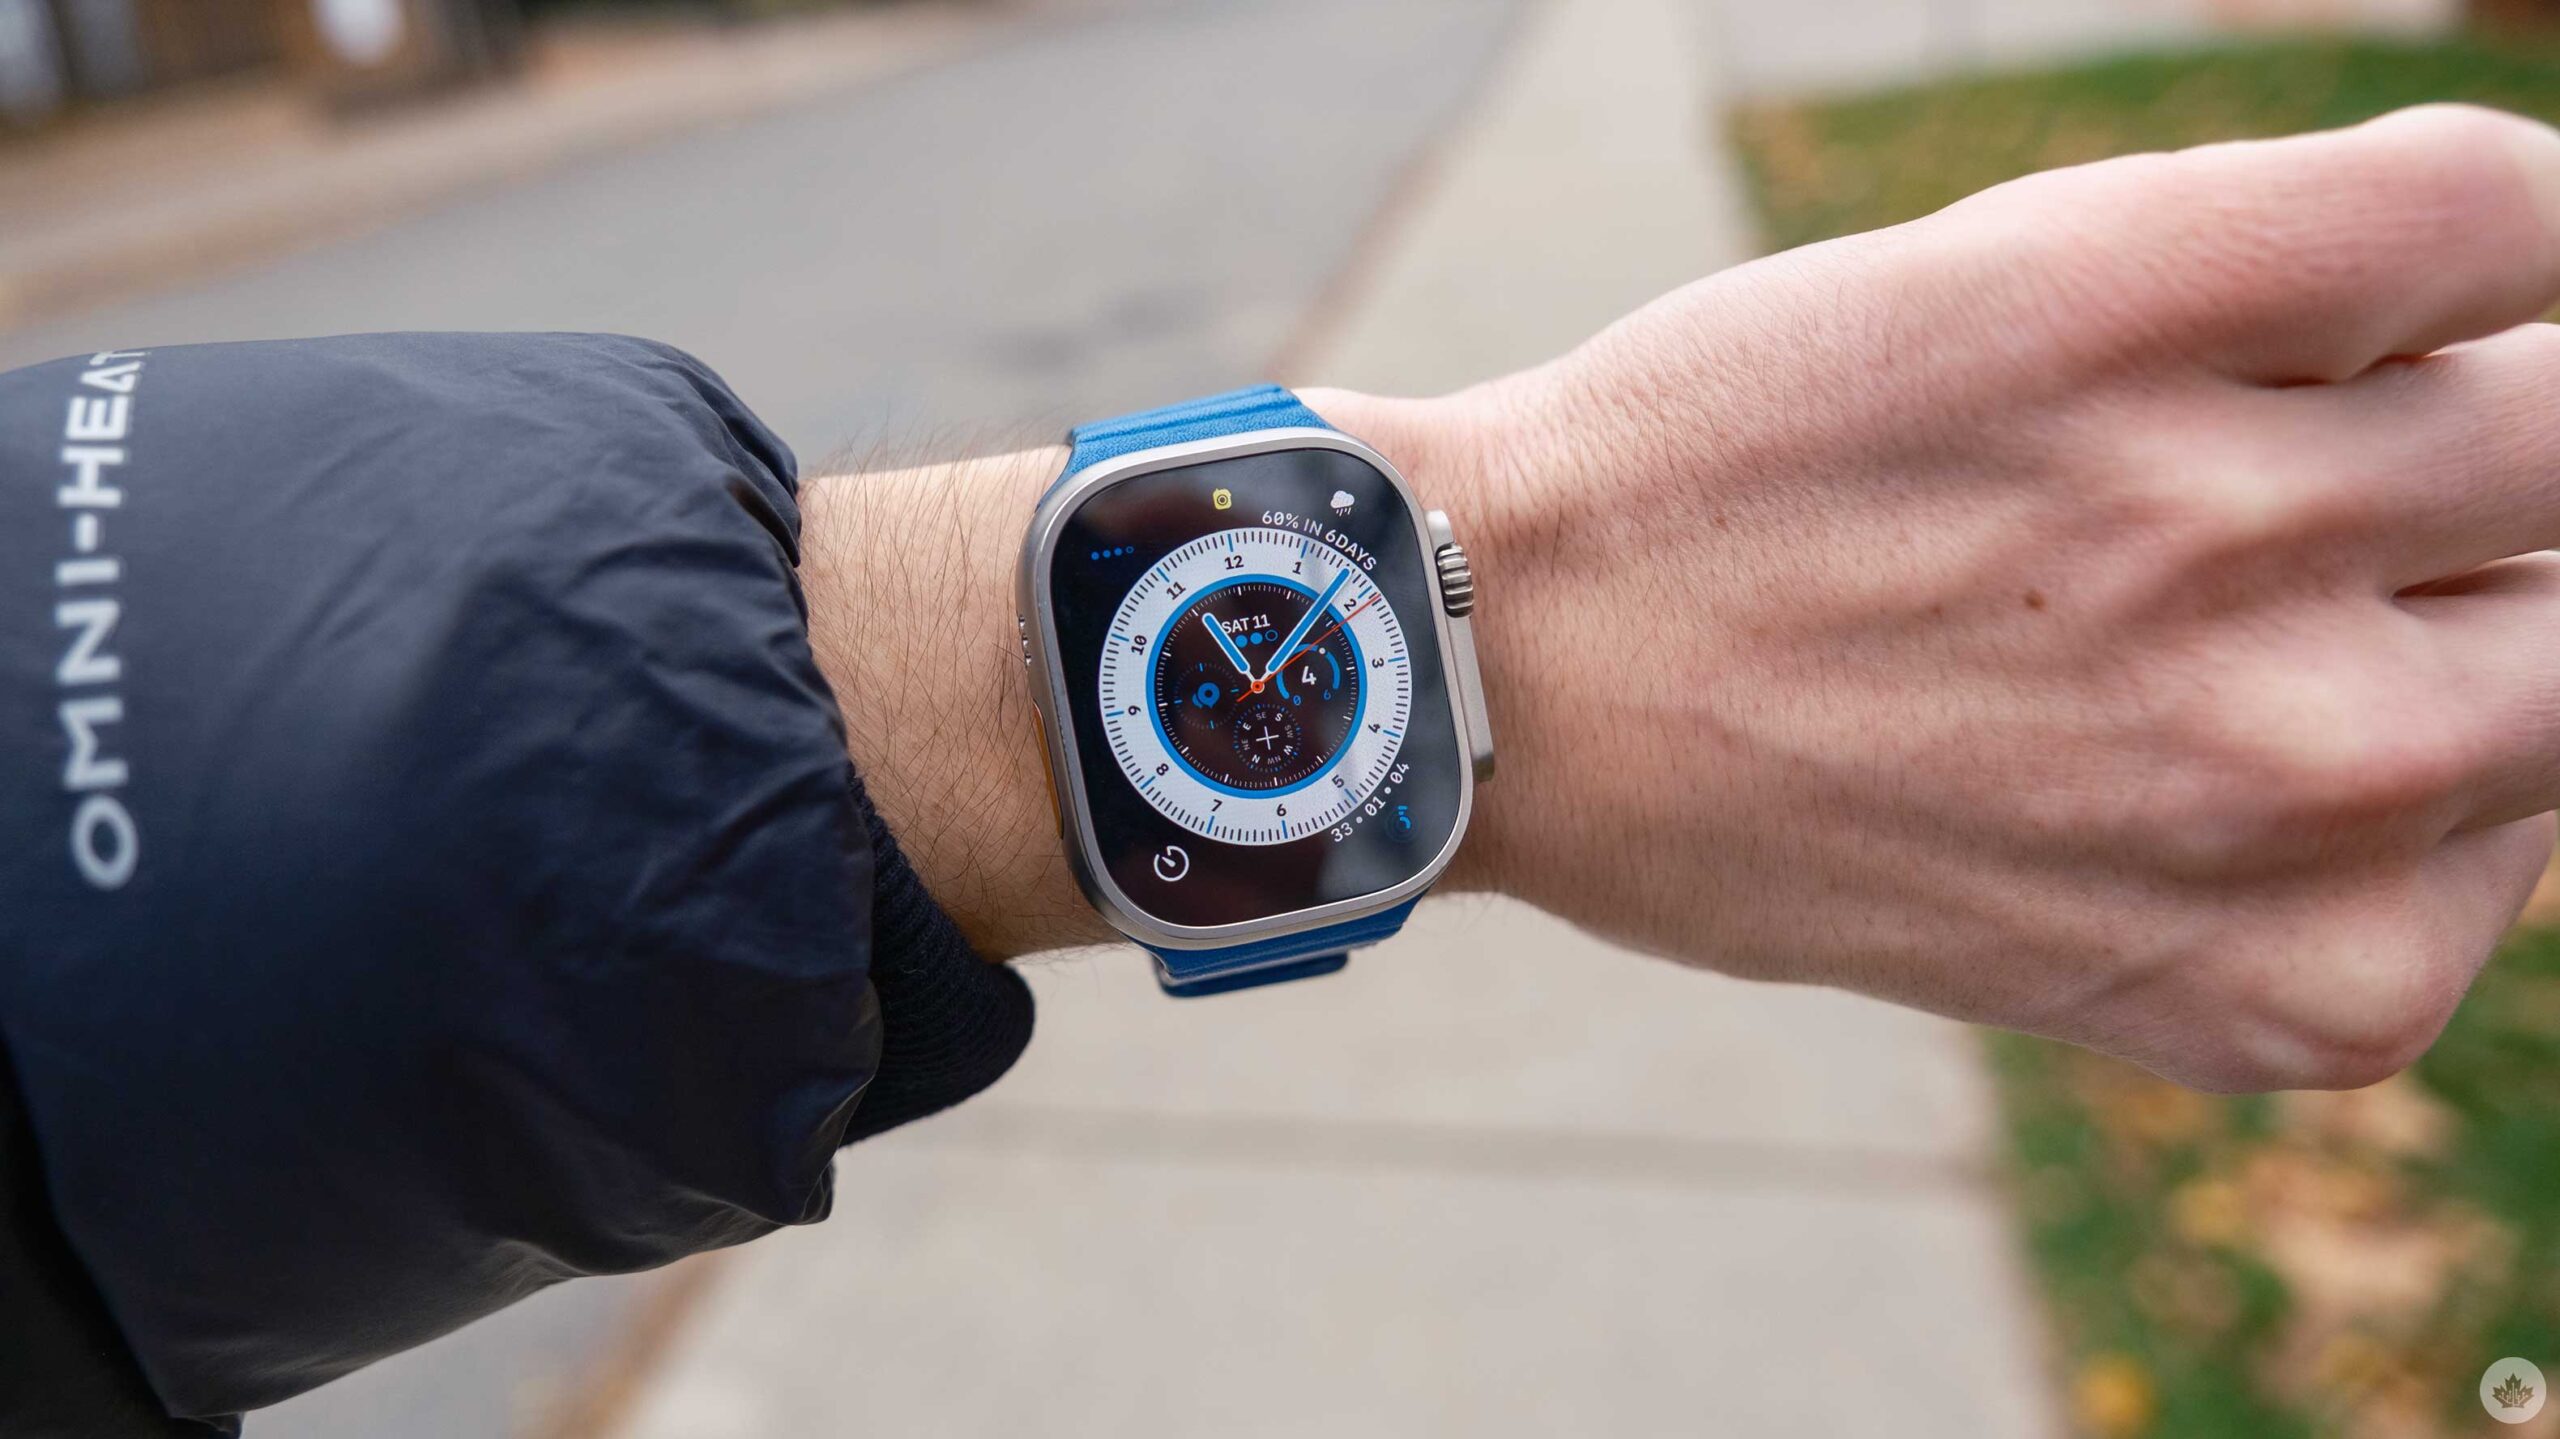 What it's like to use an Apple Watch with cellular in Canada